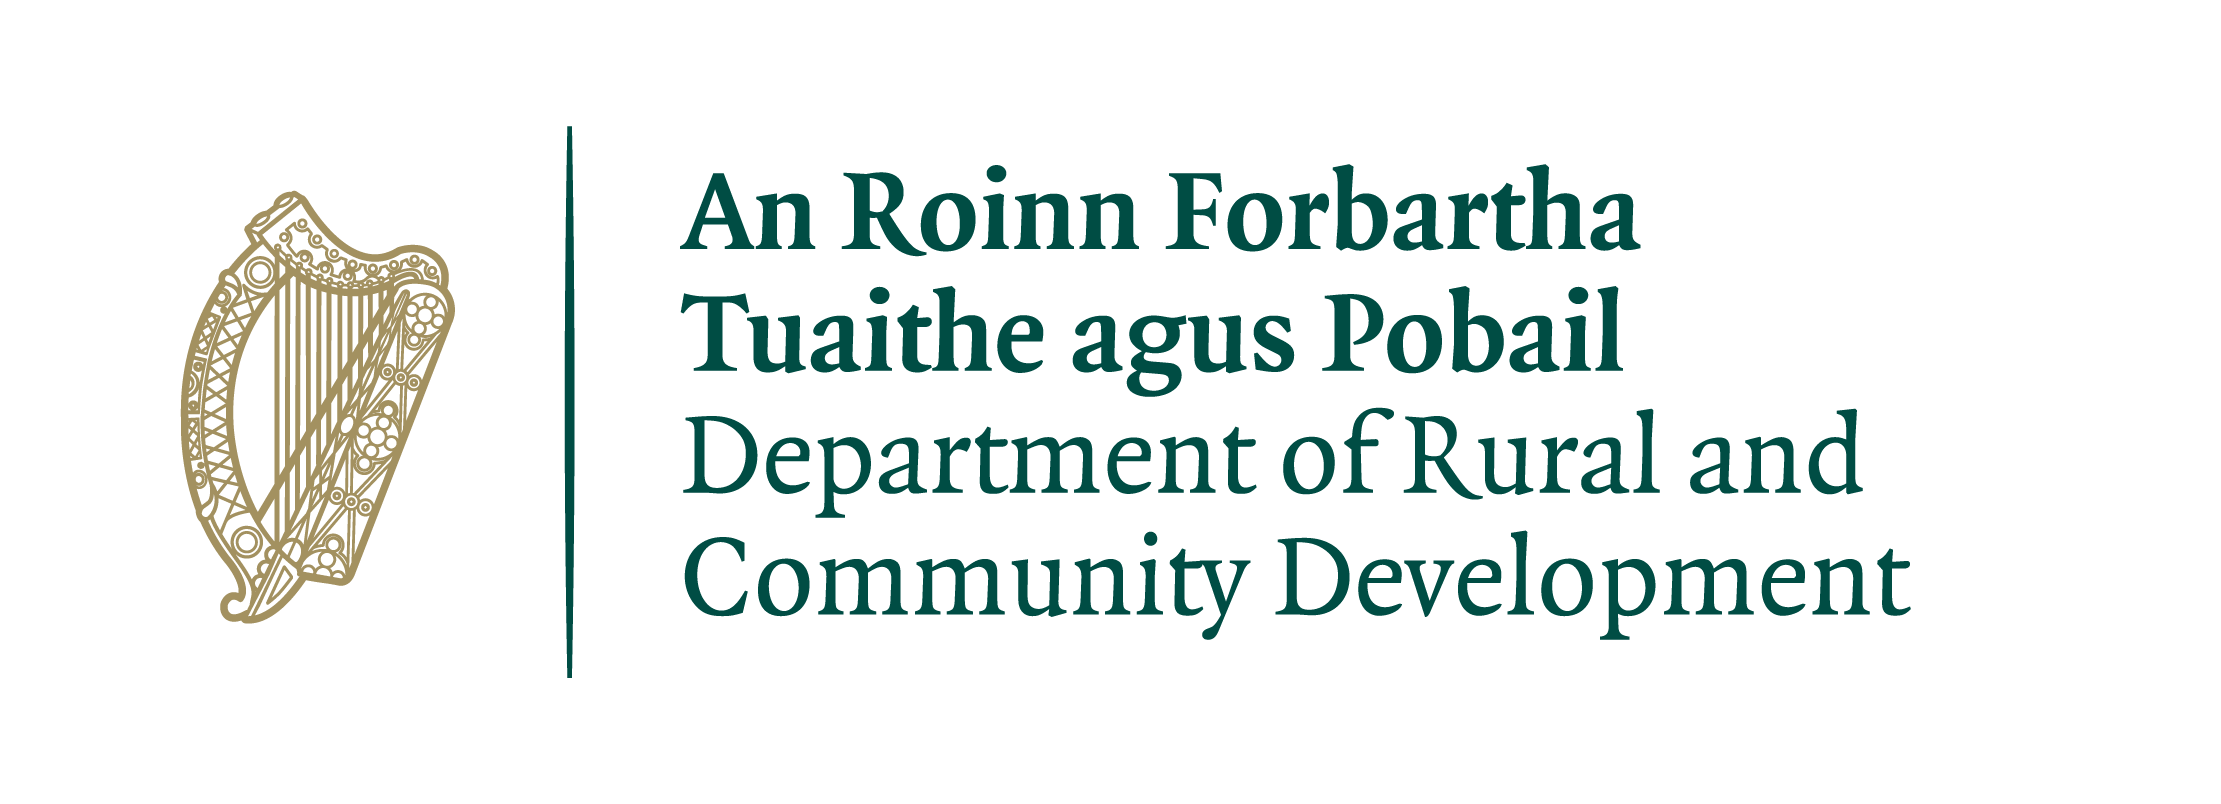 Department of Rural and Community Development logo